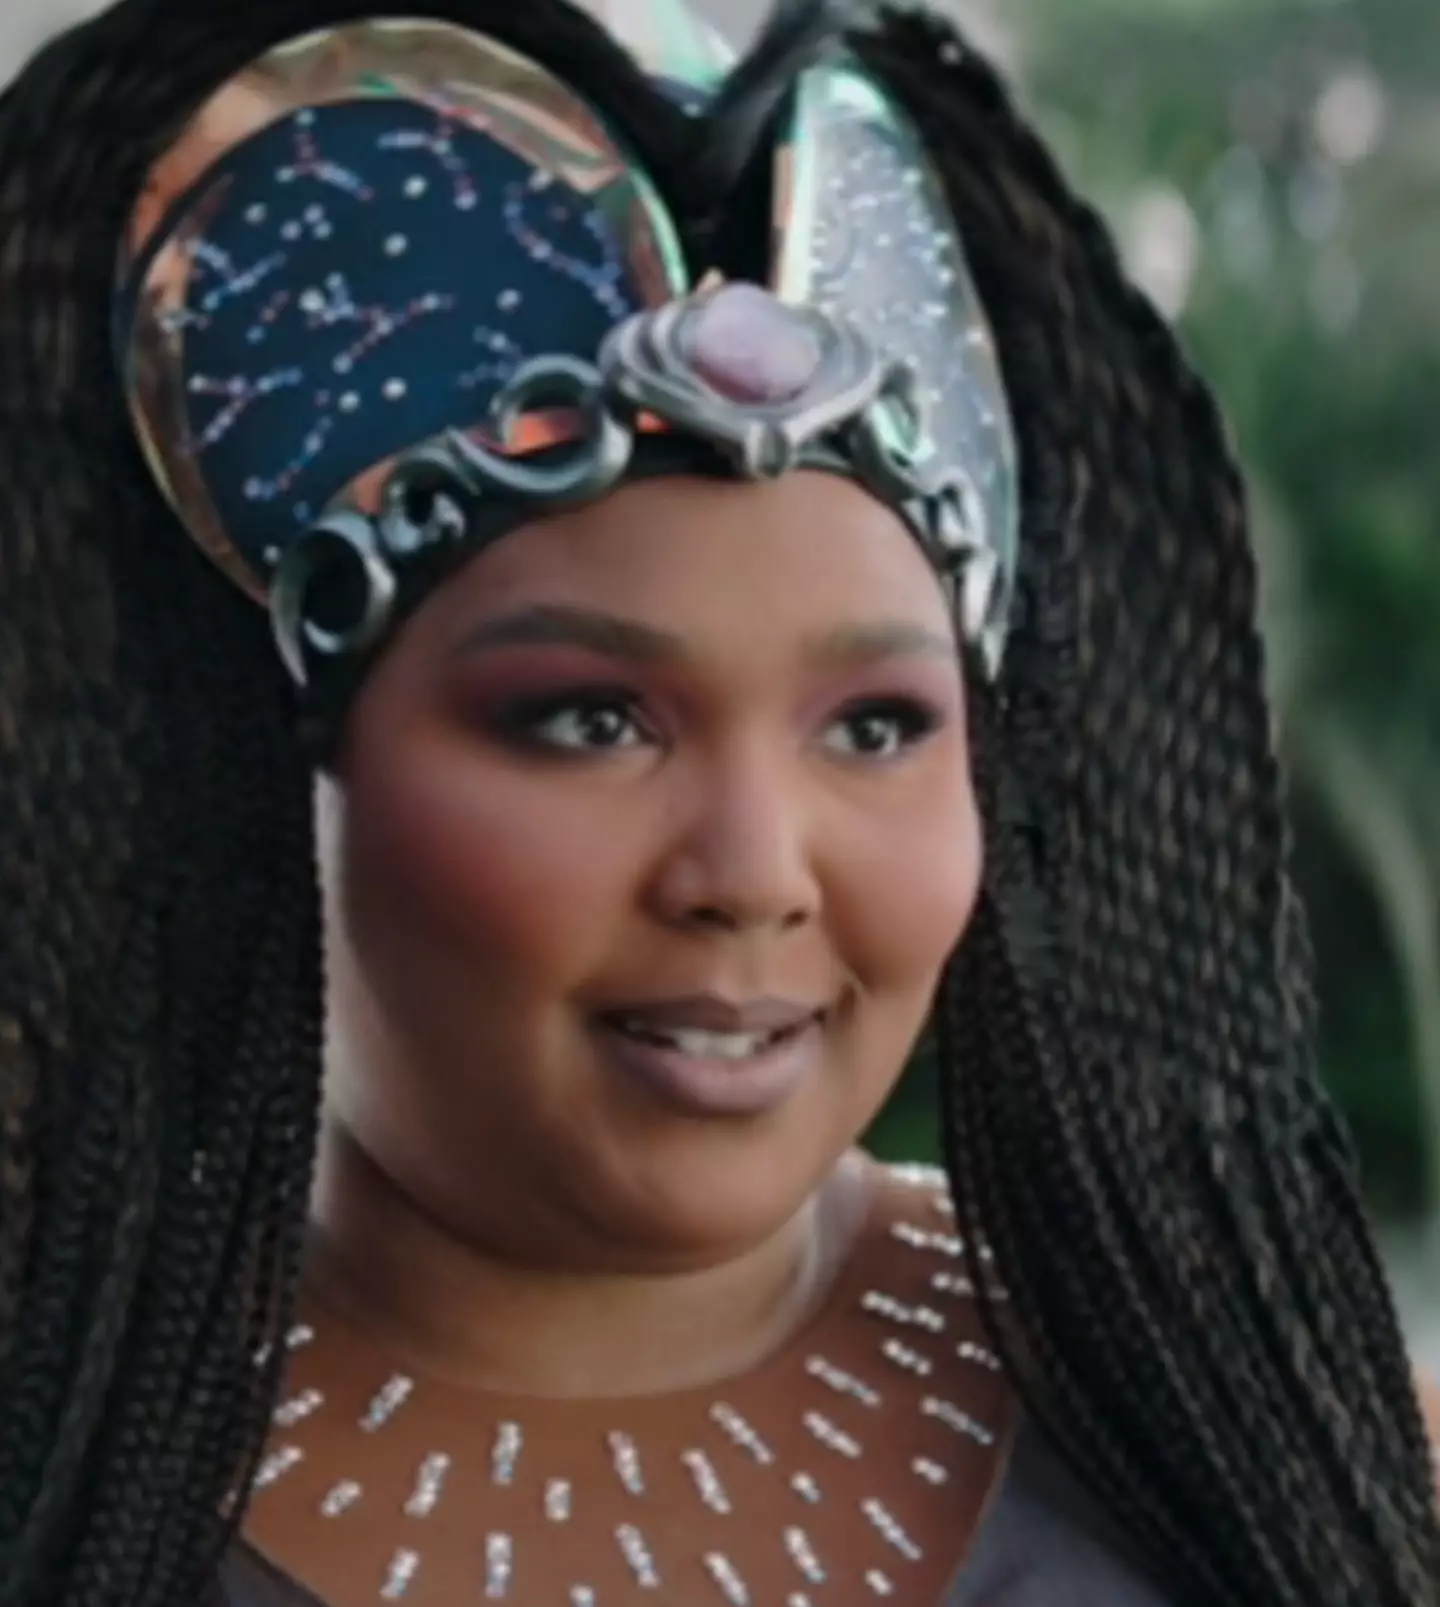 Lizzo was ever present in the latest episode of The Mandalorian.